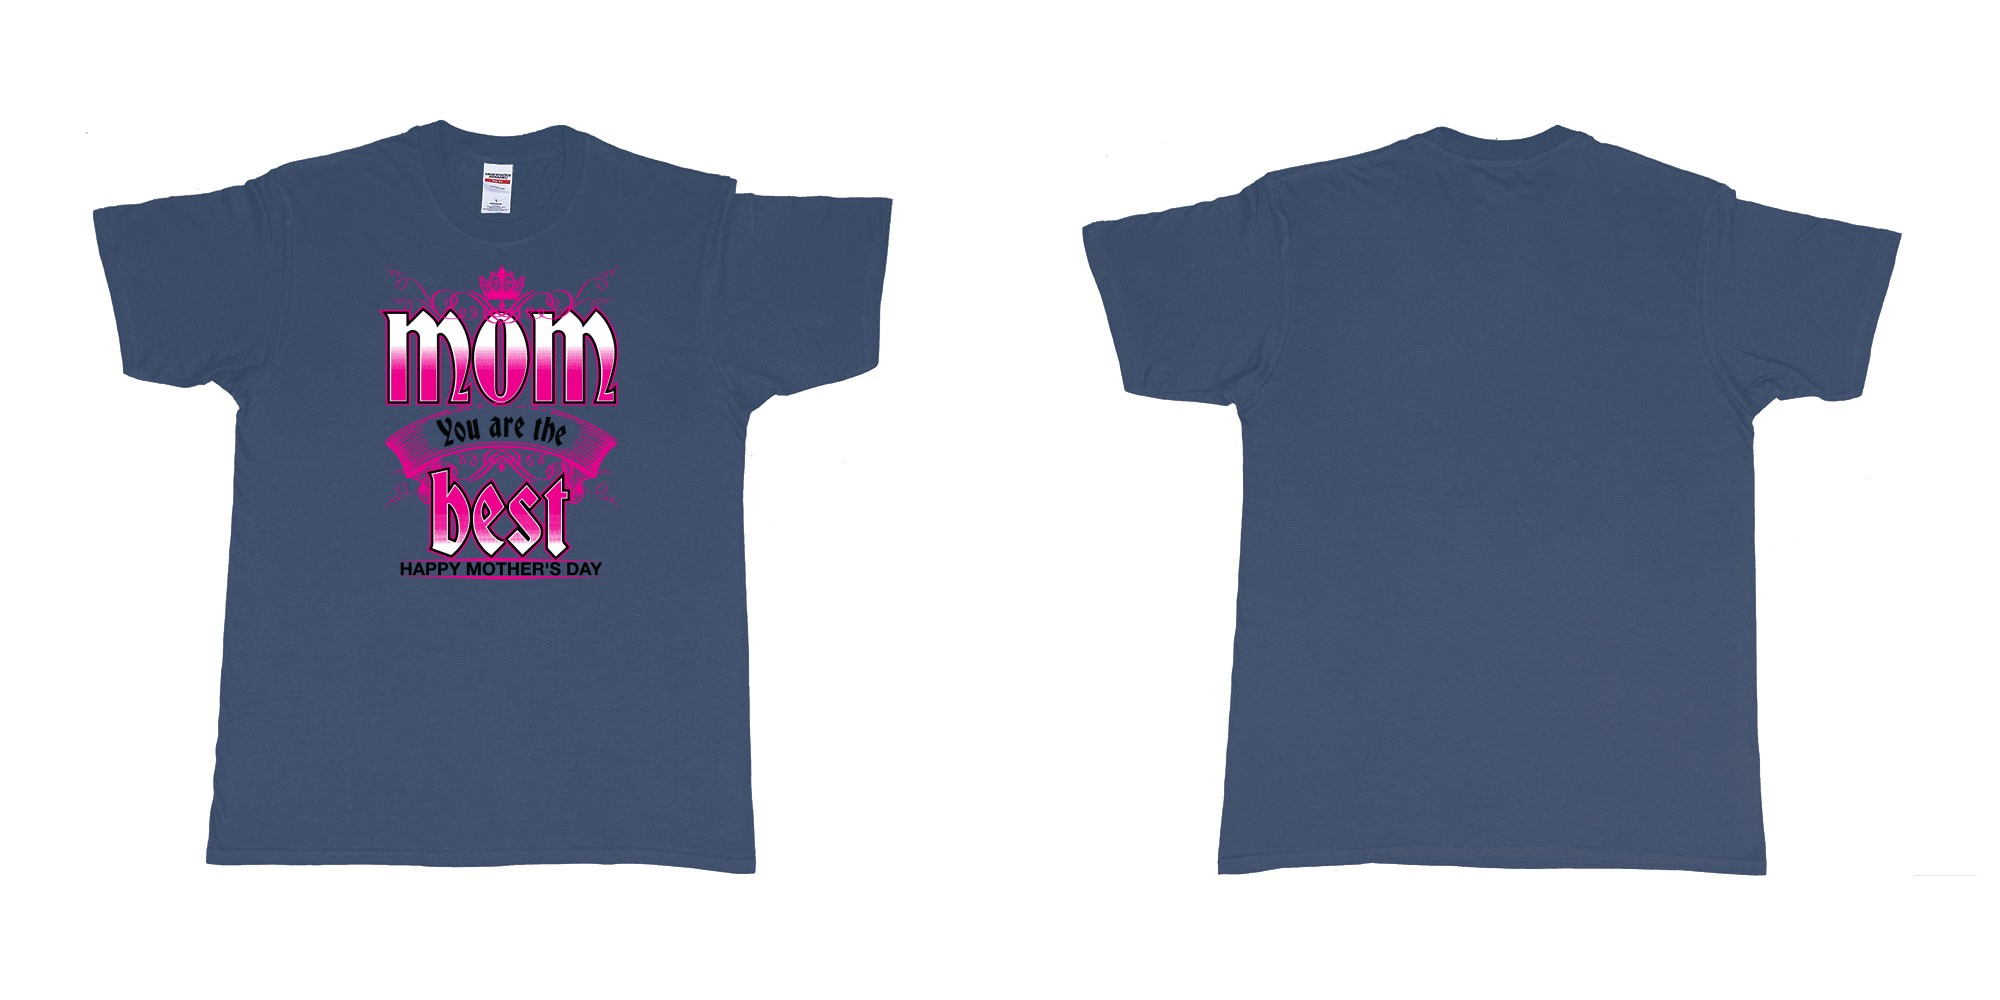 Custom tshirt design crown mom you are the best happy morthers day in fabric color navy choice your own text made in Bali by The Pirate Way